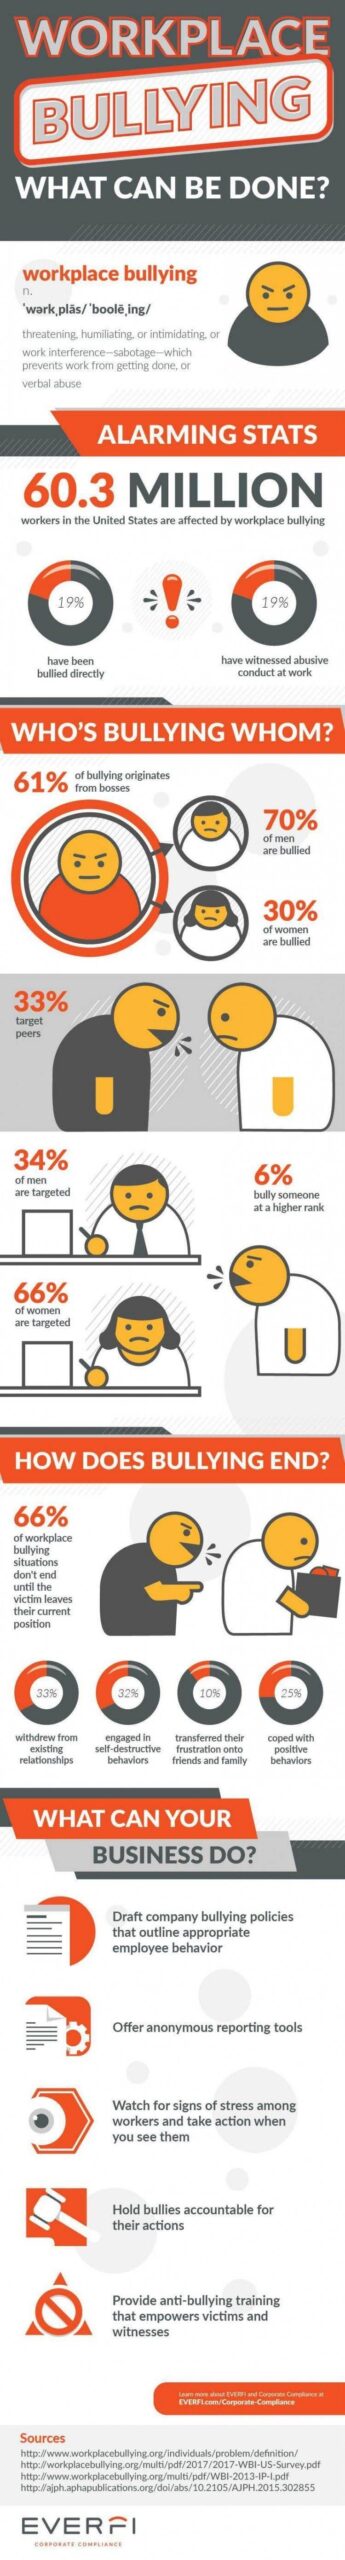 Bad Behavior is Bad Business [INFOGRAPHIC] - Our Corporate Life | Business infographic ...